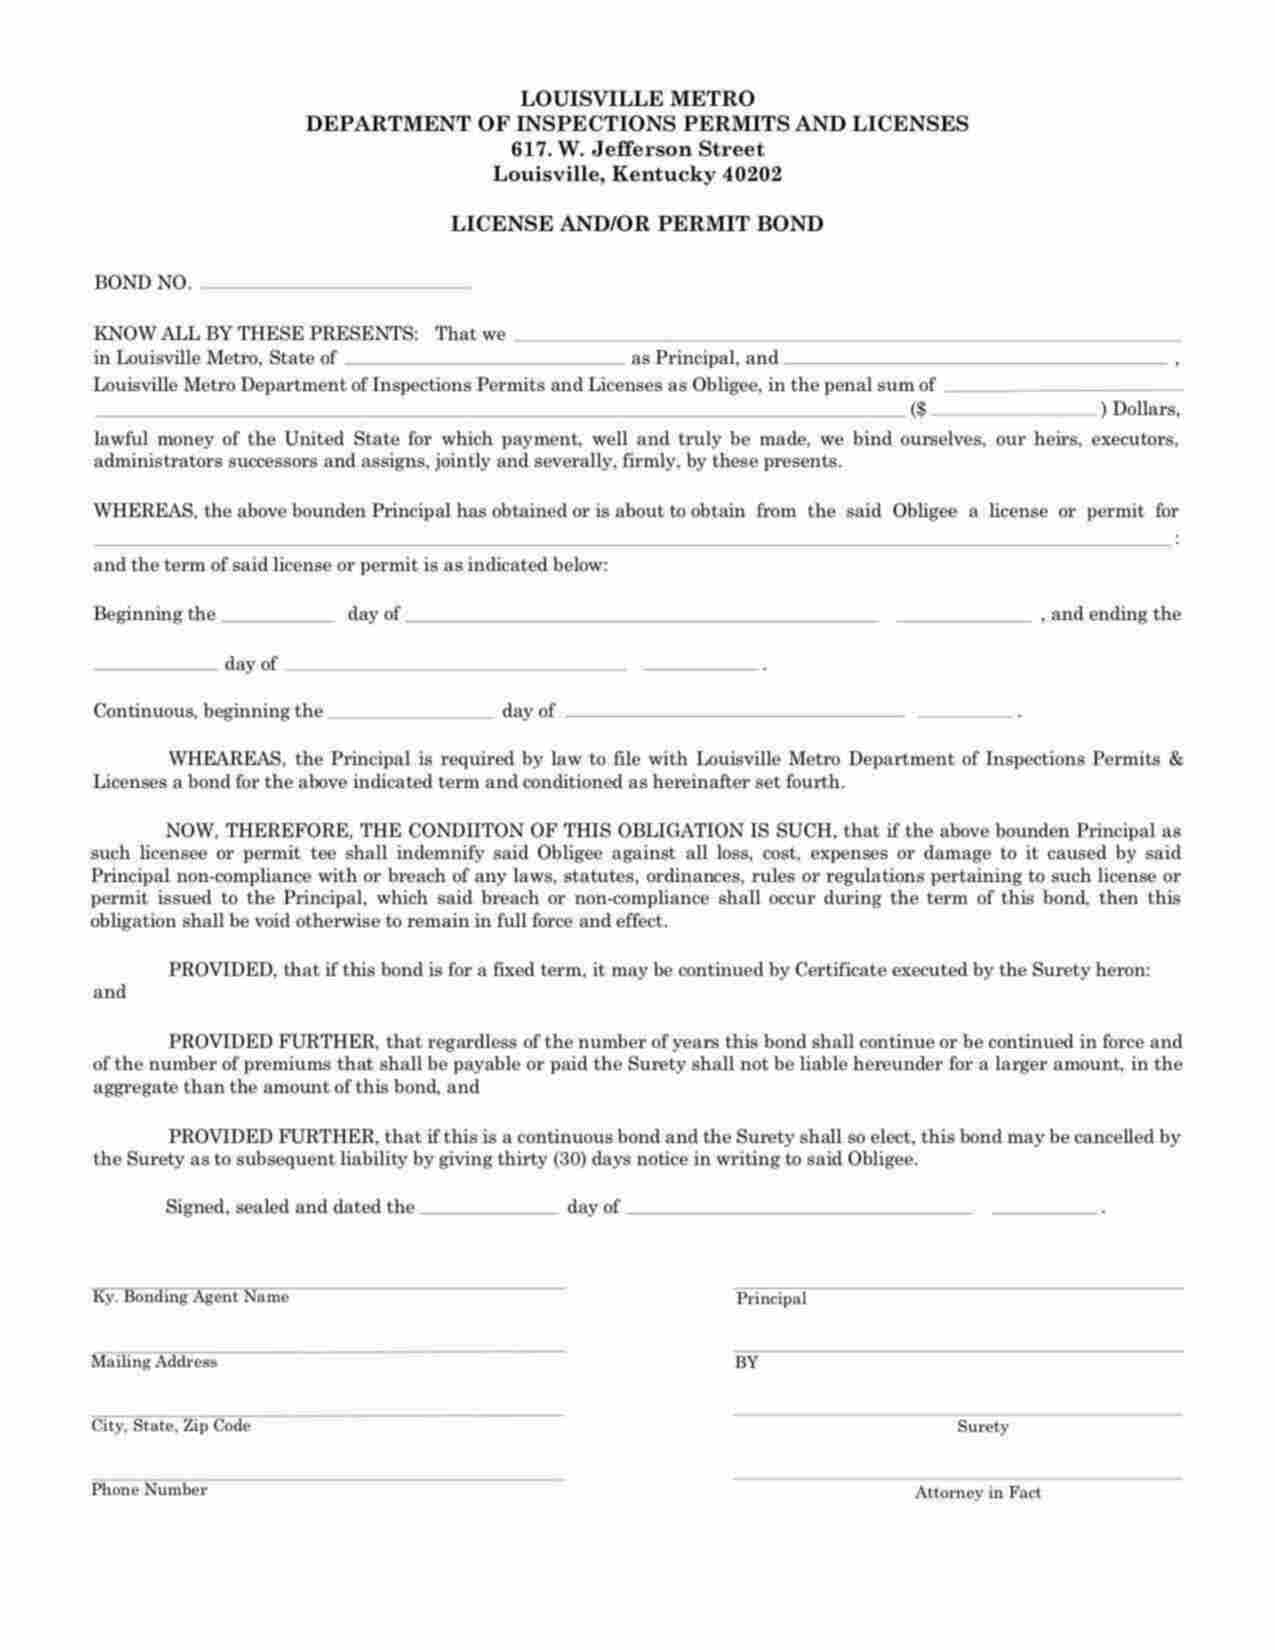 Kentucky License and/or Permit Bond Form